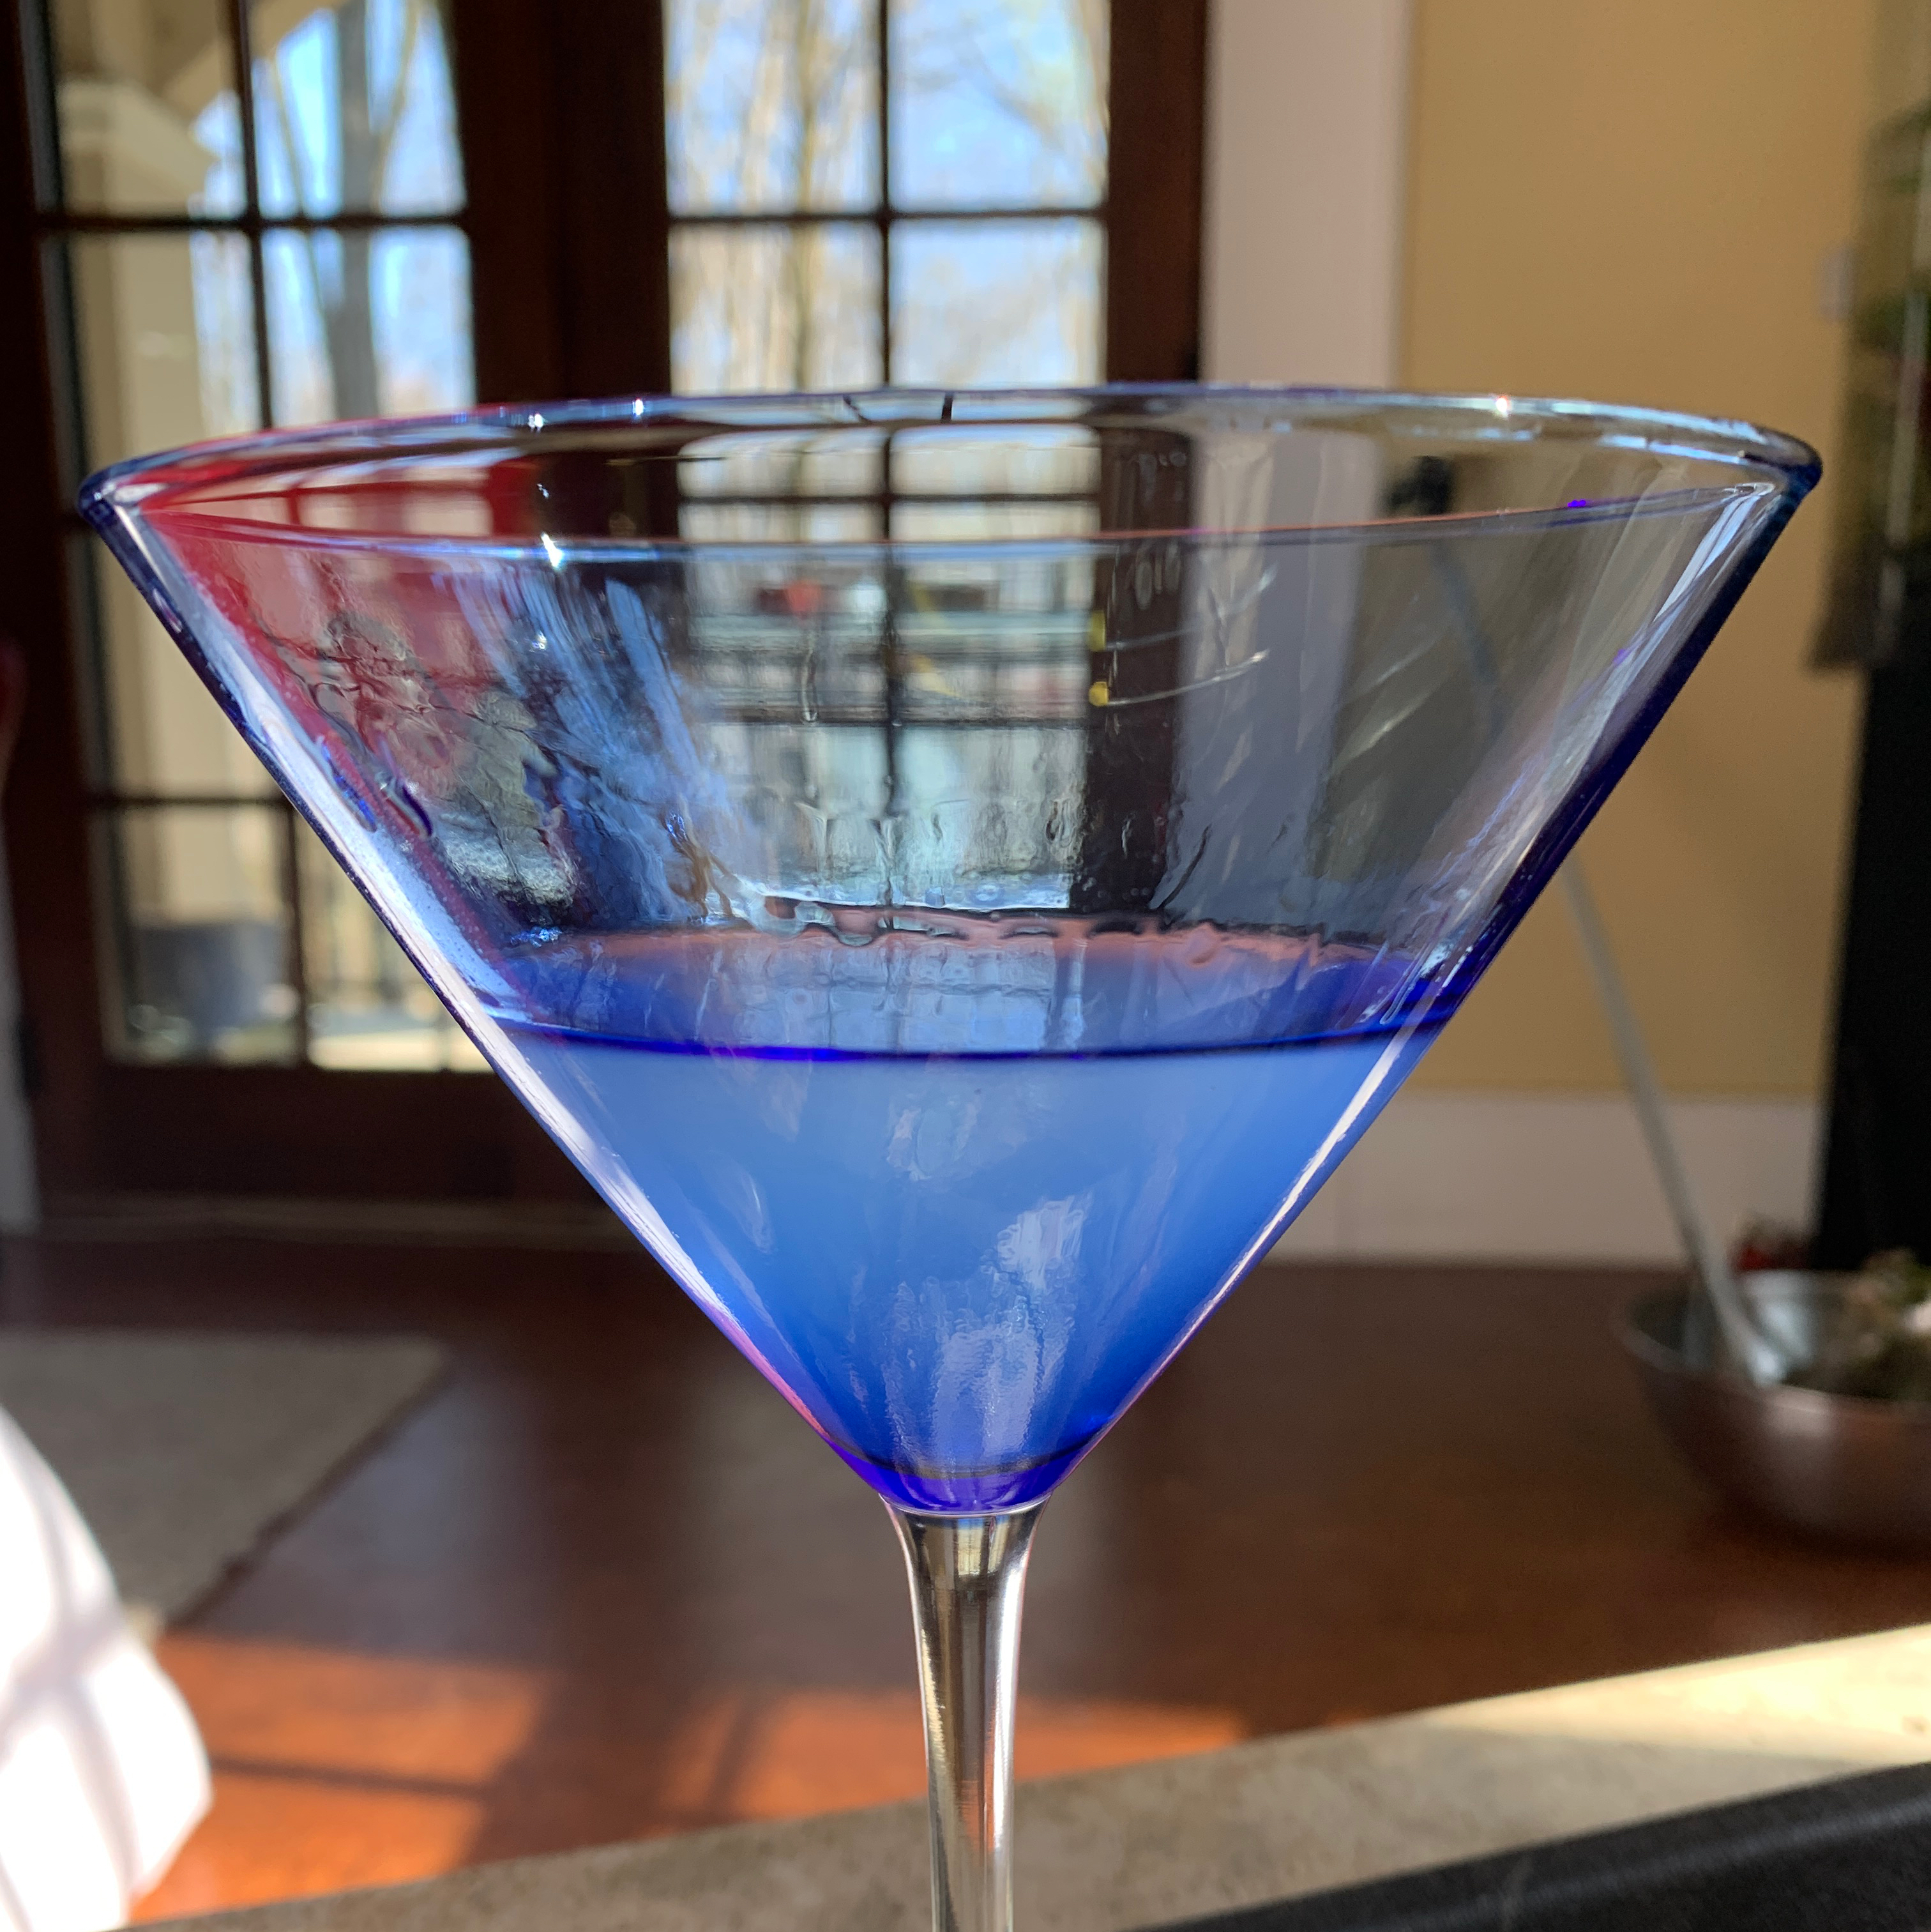 Classic Aviation Cocktail